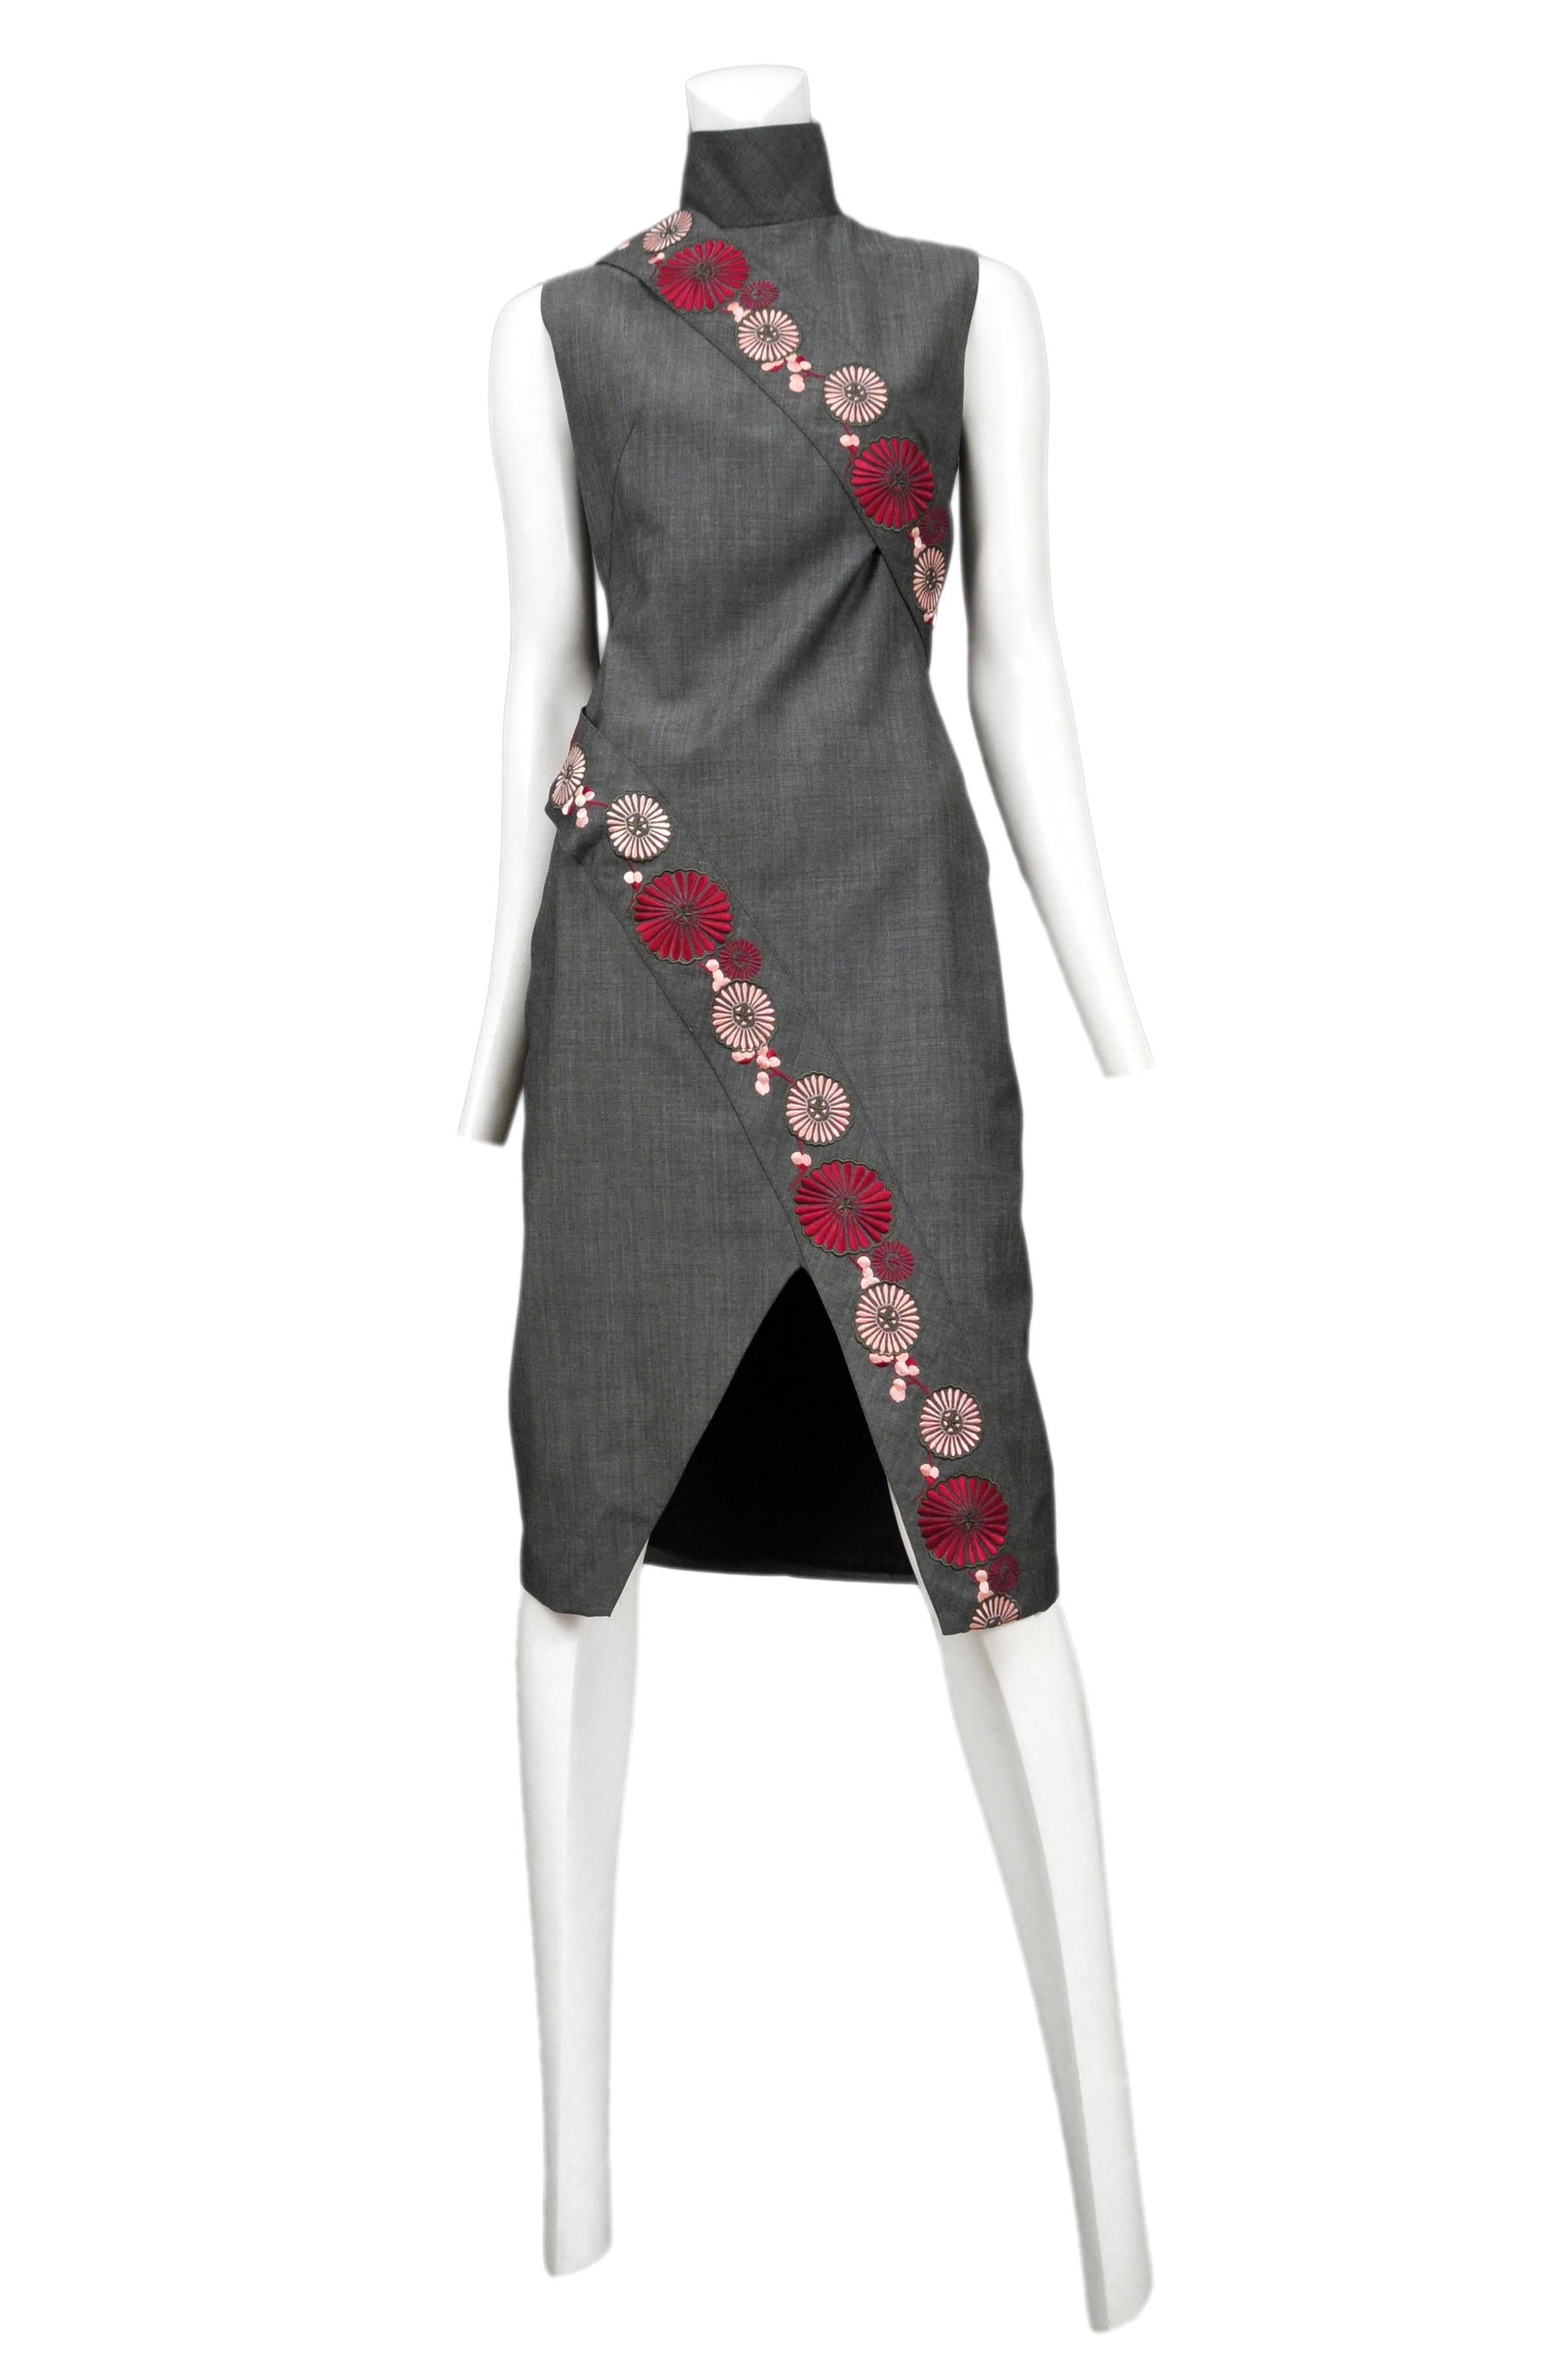 Grey wool chengsom style dress with bands on embroidered flowers. Asymmetrical hem. Voss SS 2001. 

Please contact for additional information and photos.